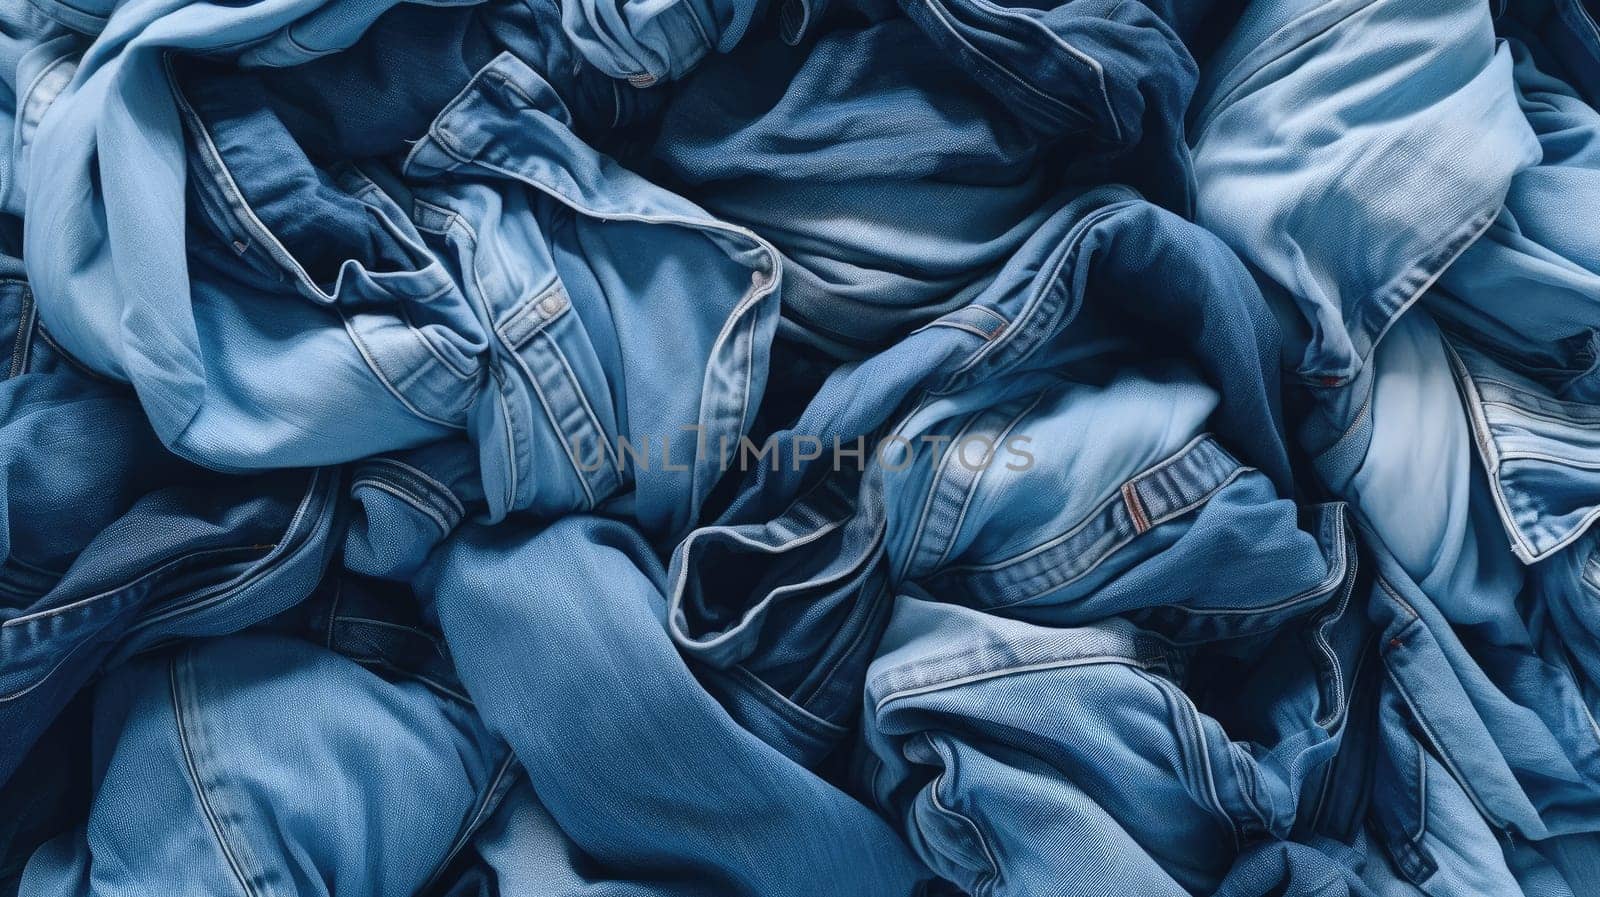 Assorted Denim Stack - Top View of Crumpled Blue Jeans as Background. Fashion Display with Textured Folded Denim Variety. Clothing Selection and Texture Concept for Design and Marketing.